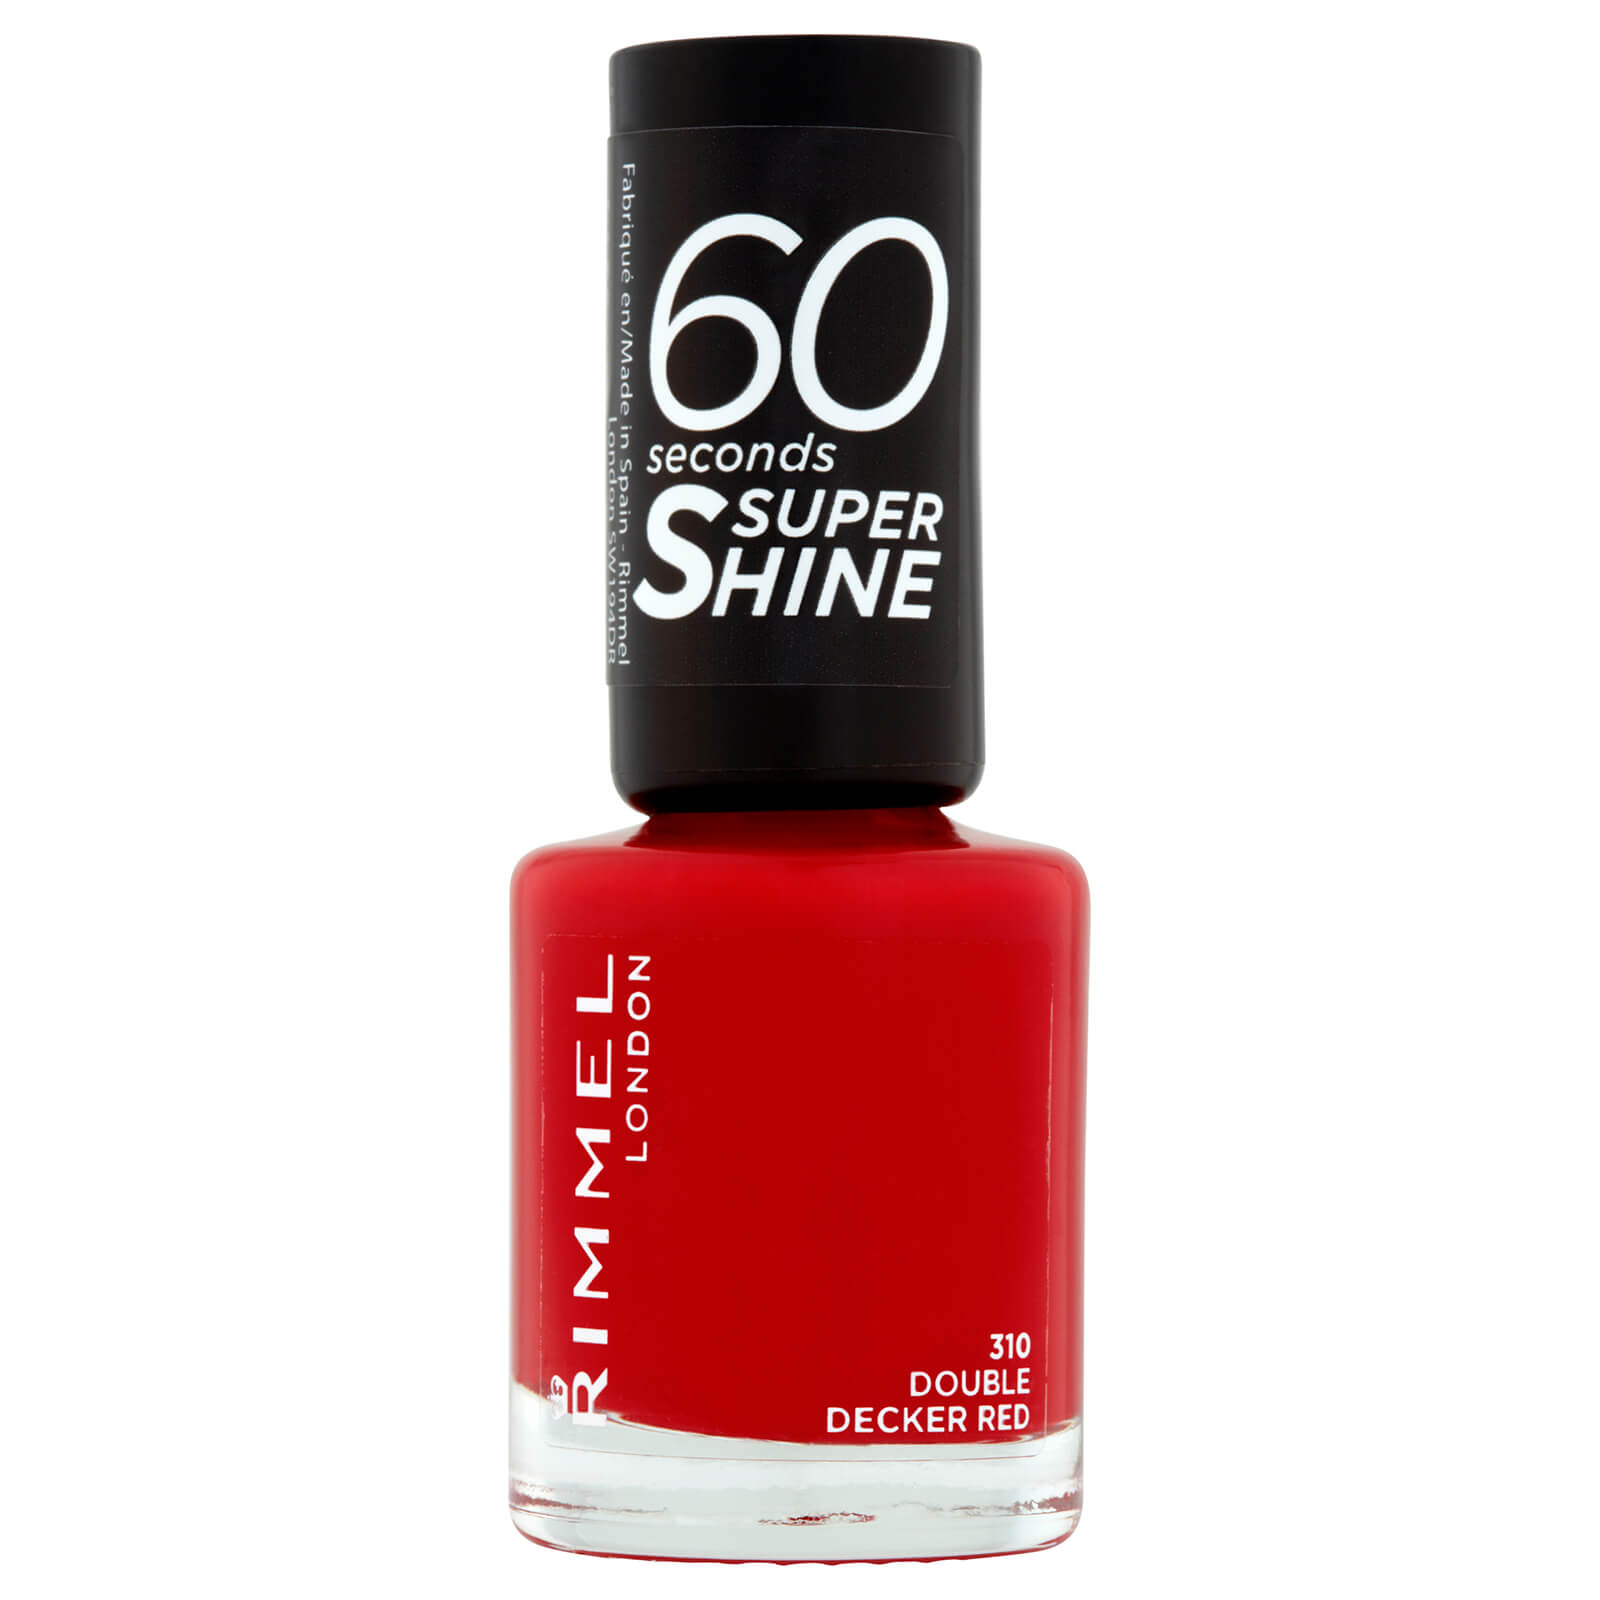 Rimmel 60 Seconds Super Shine Nail Polish 8ml (Various Shades) - Double Decker Red